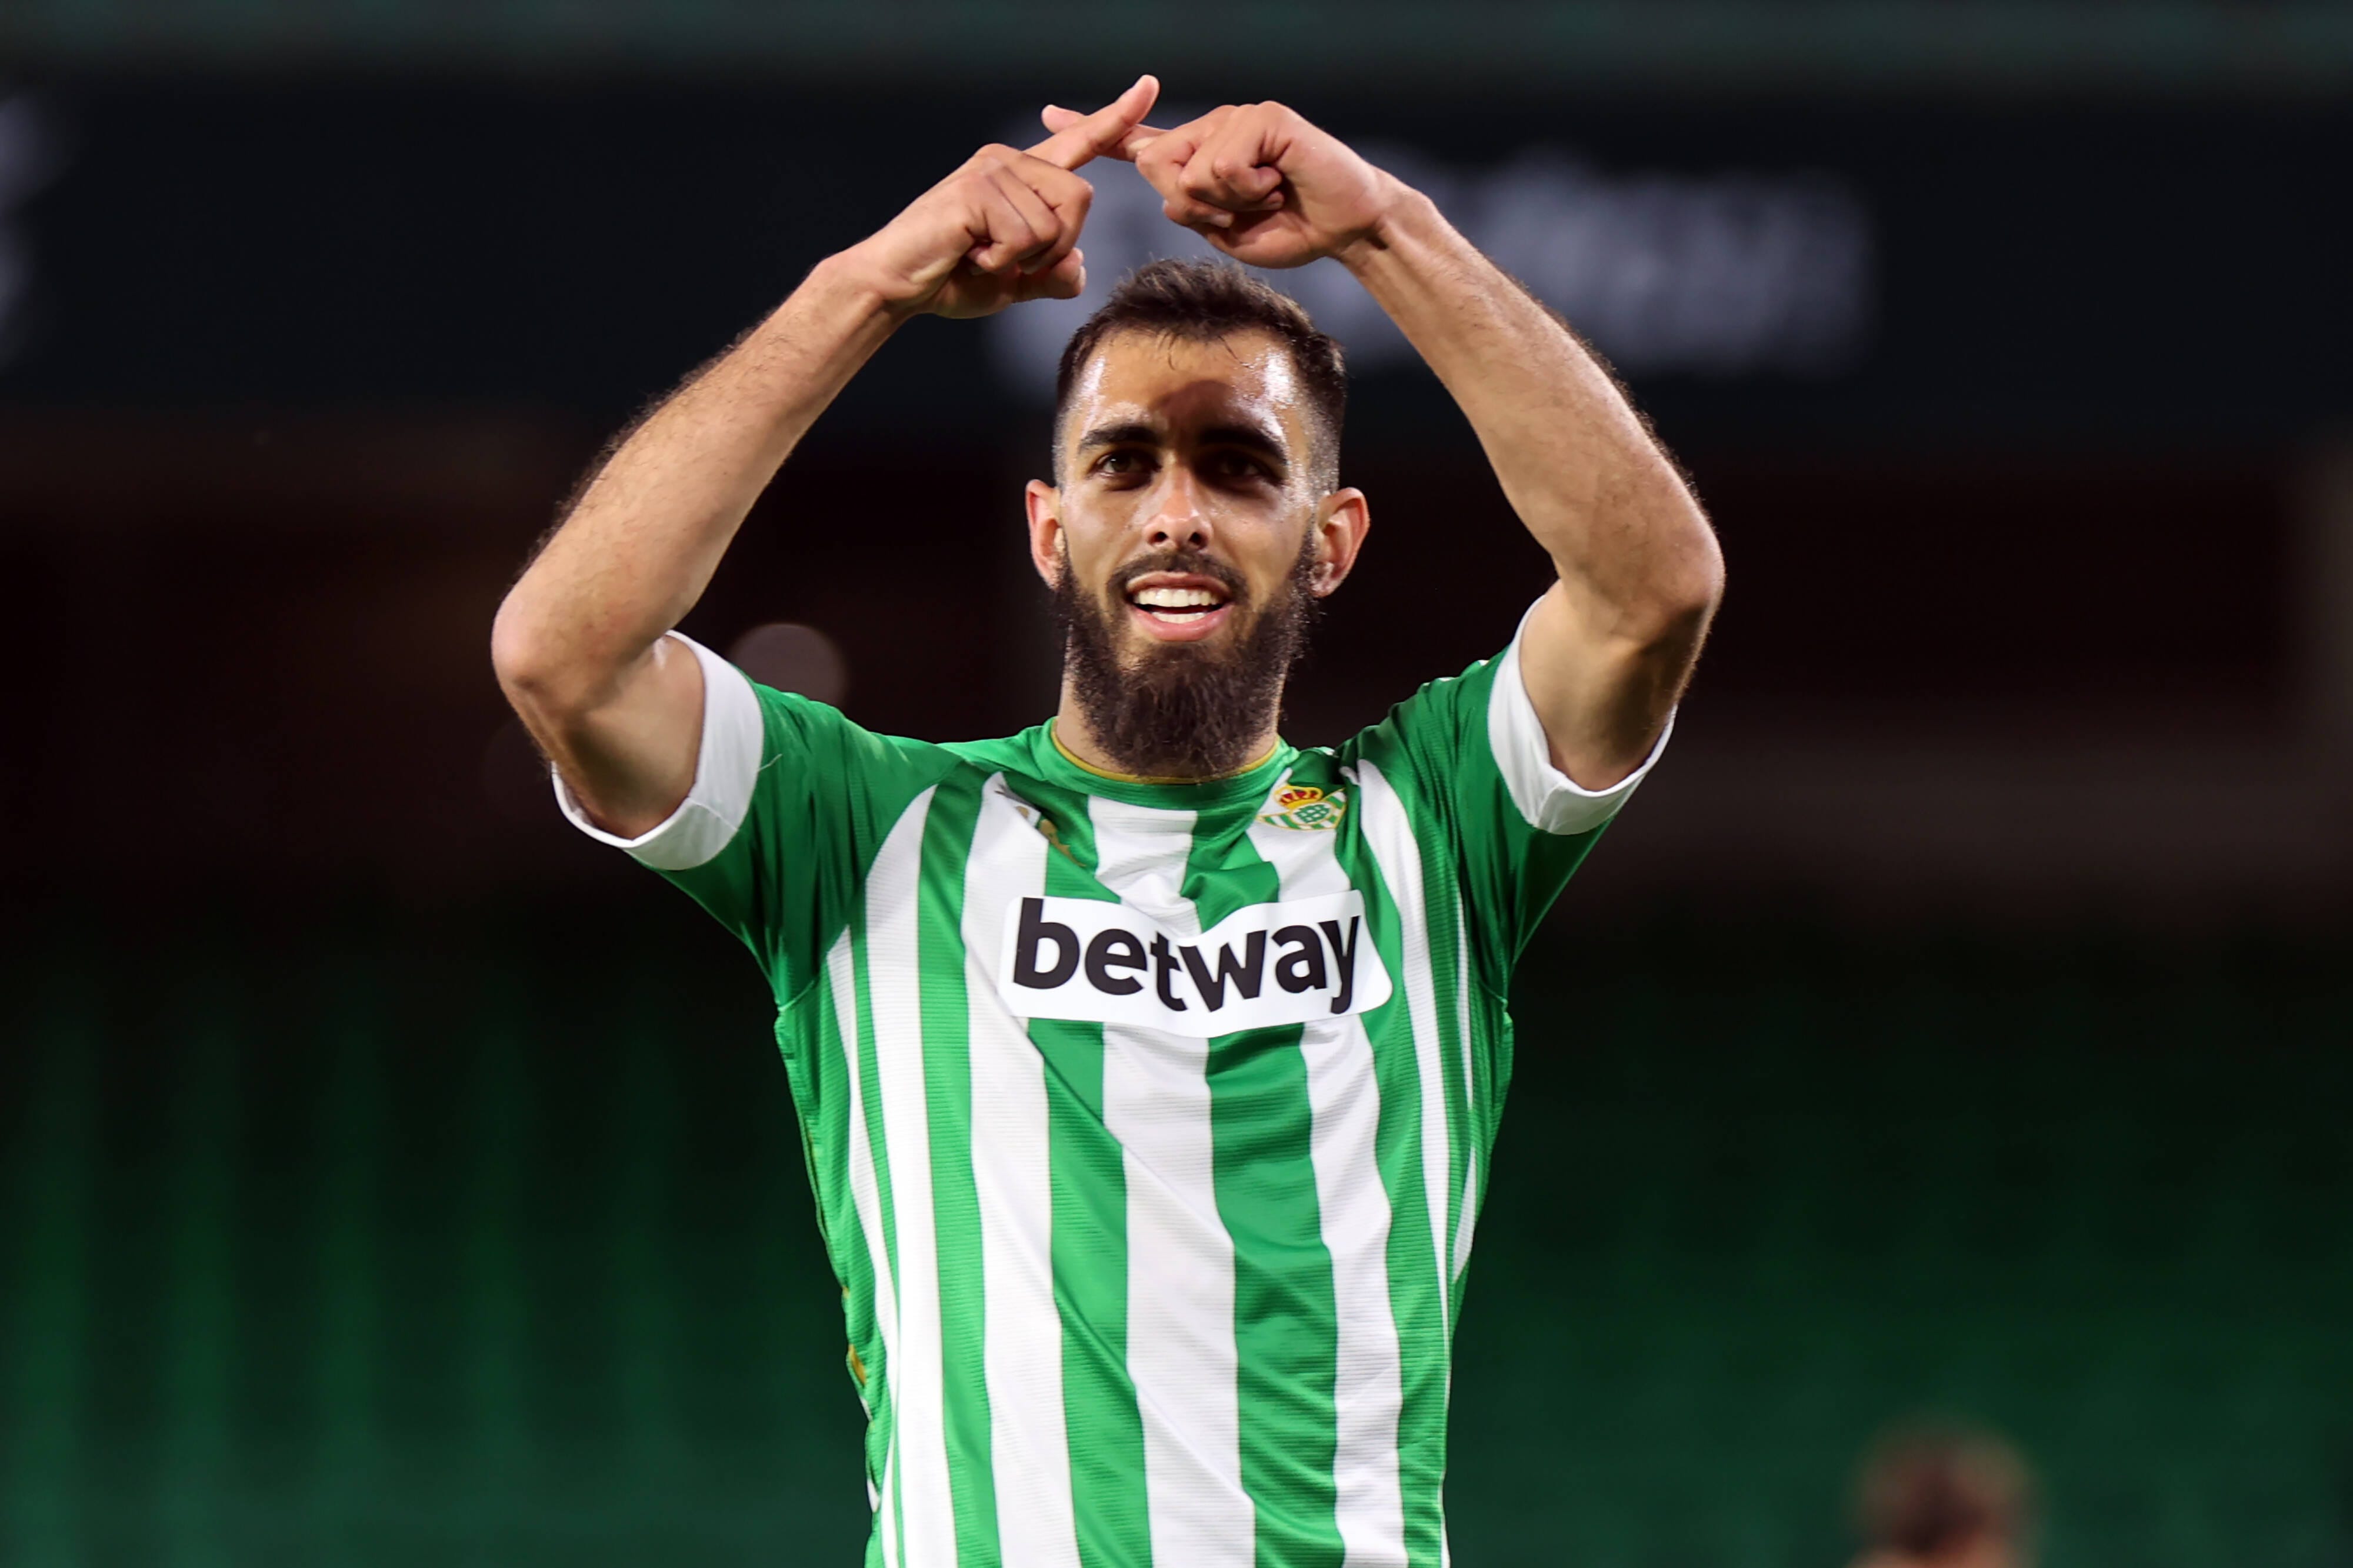 The lowdown on Real Betis Balompié